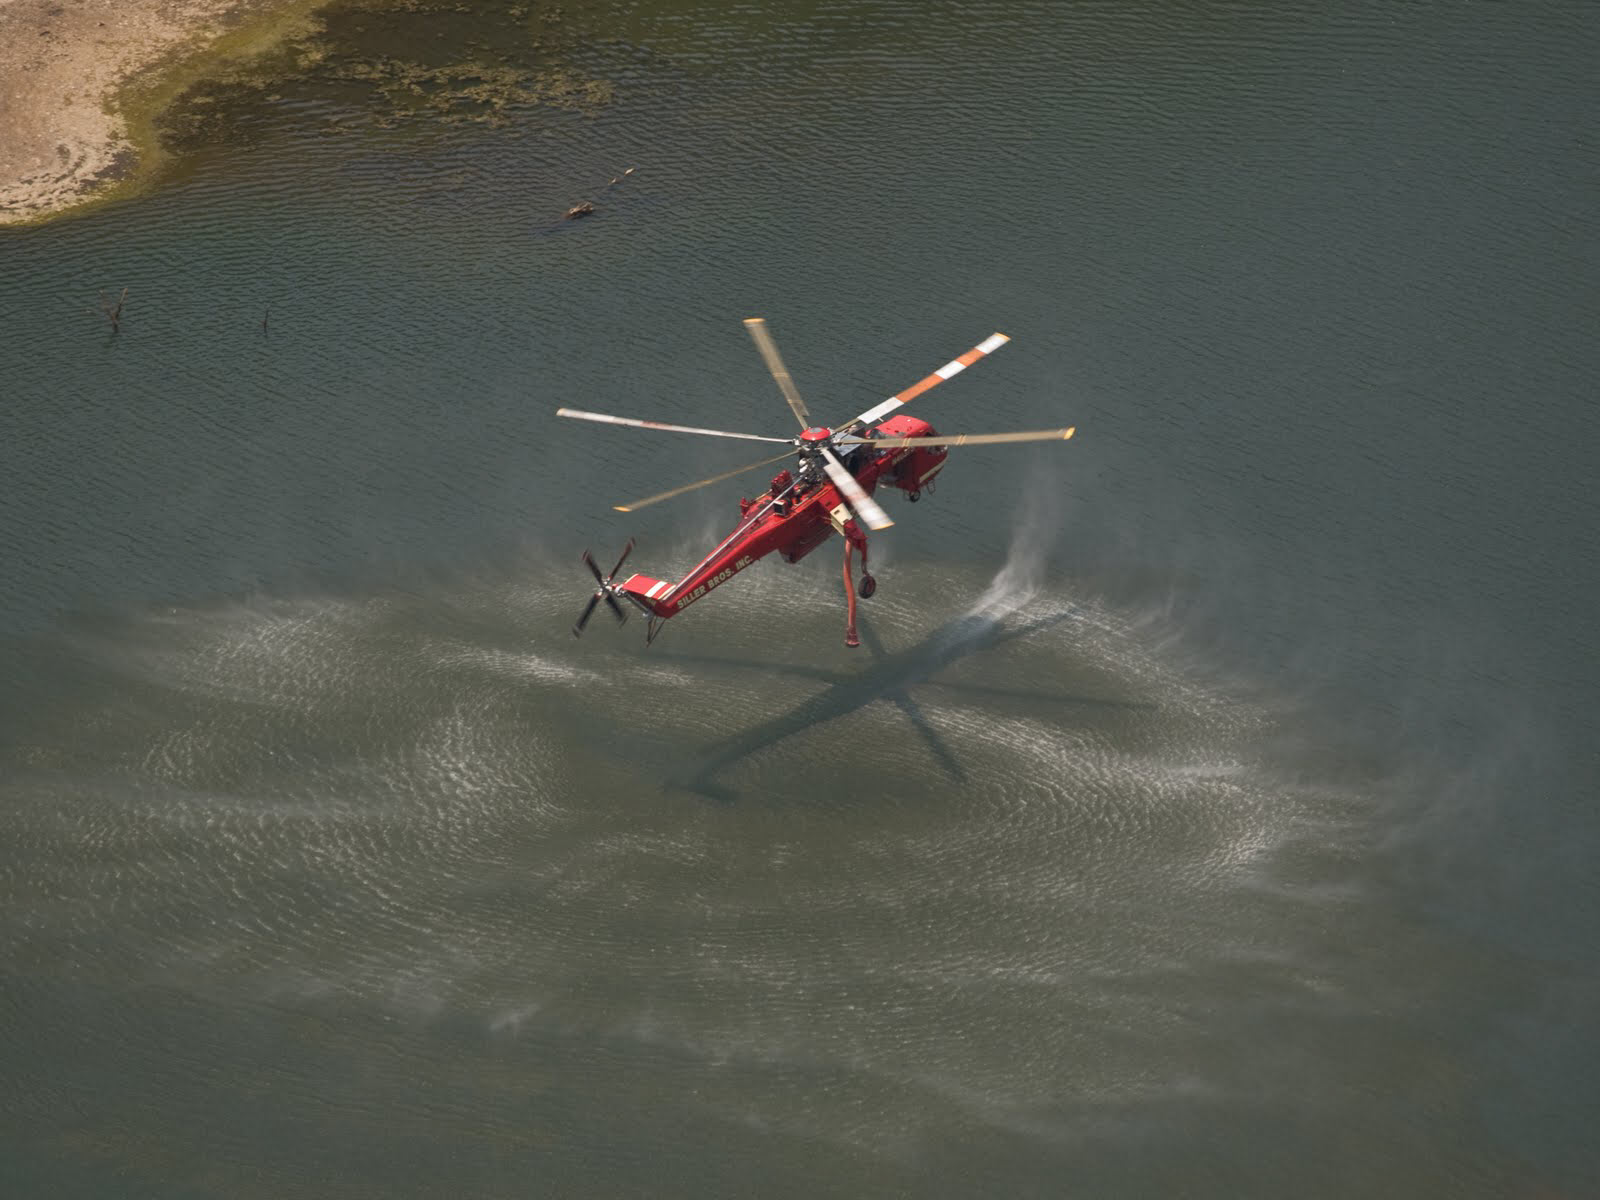 A sky crane helicopter hovering over a large body of water, preparing to dip a long hose to suck up water into a drop tank under the helicopter.